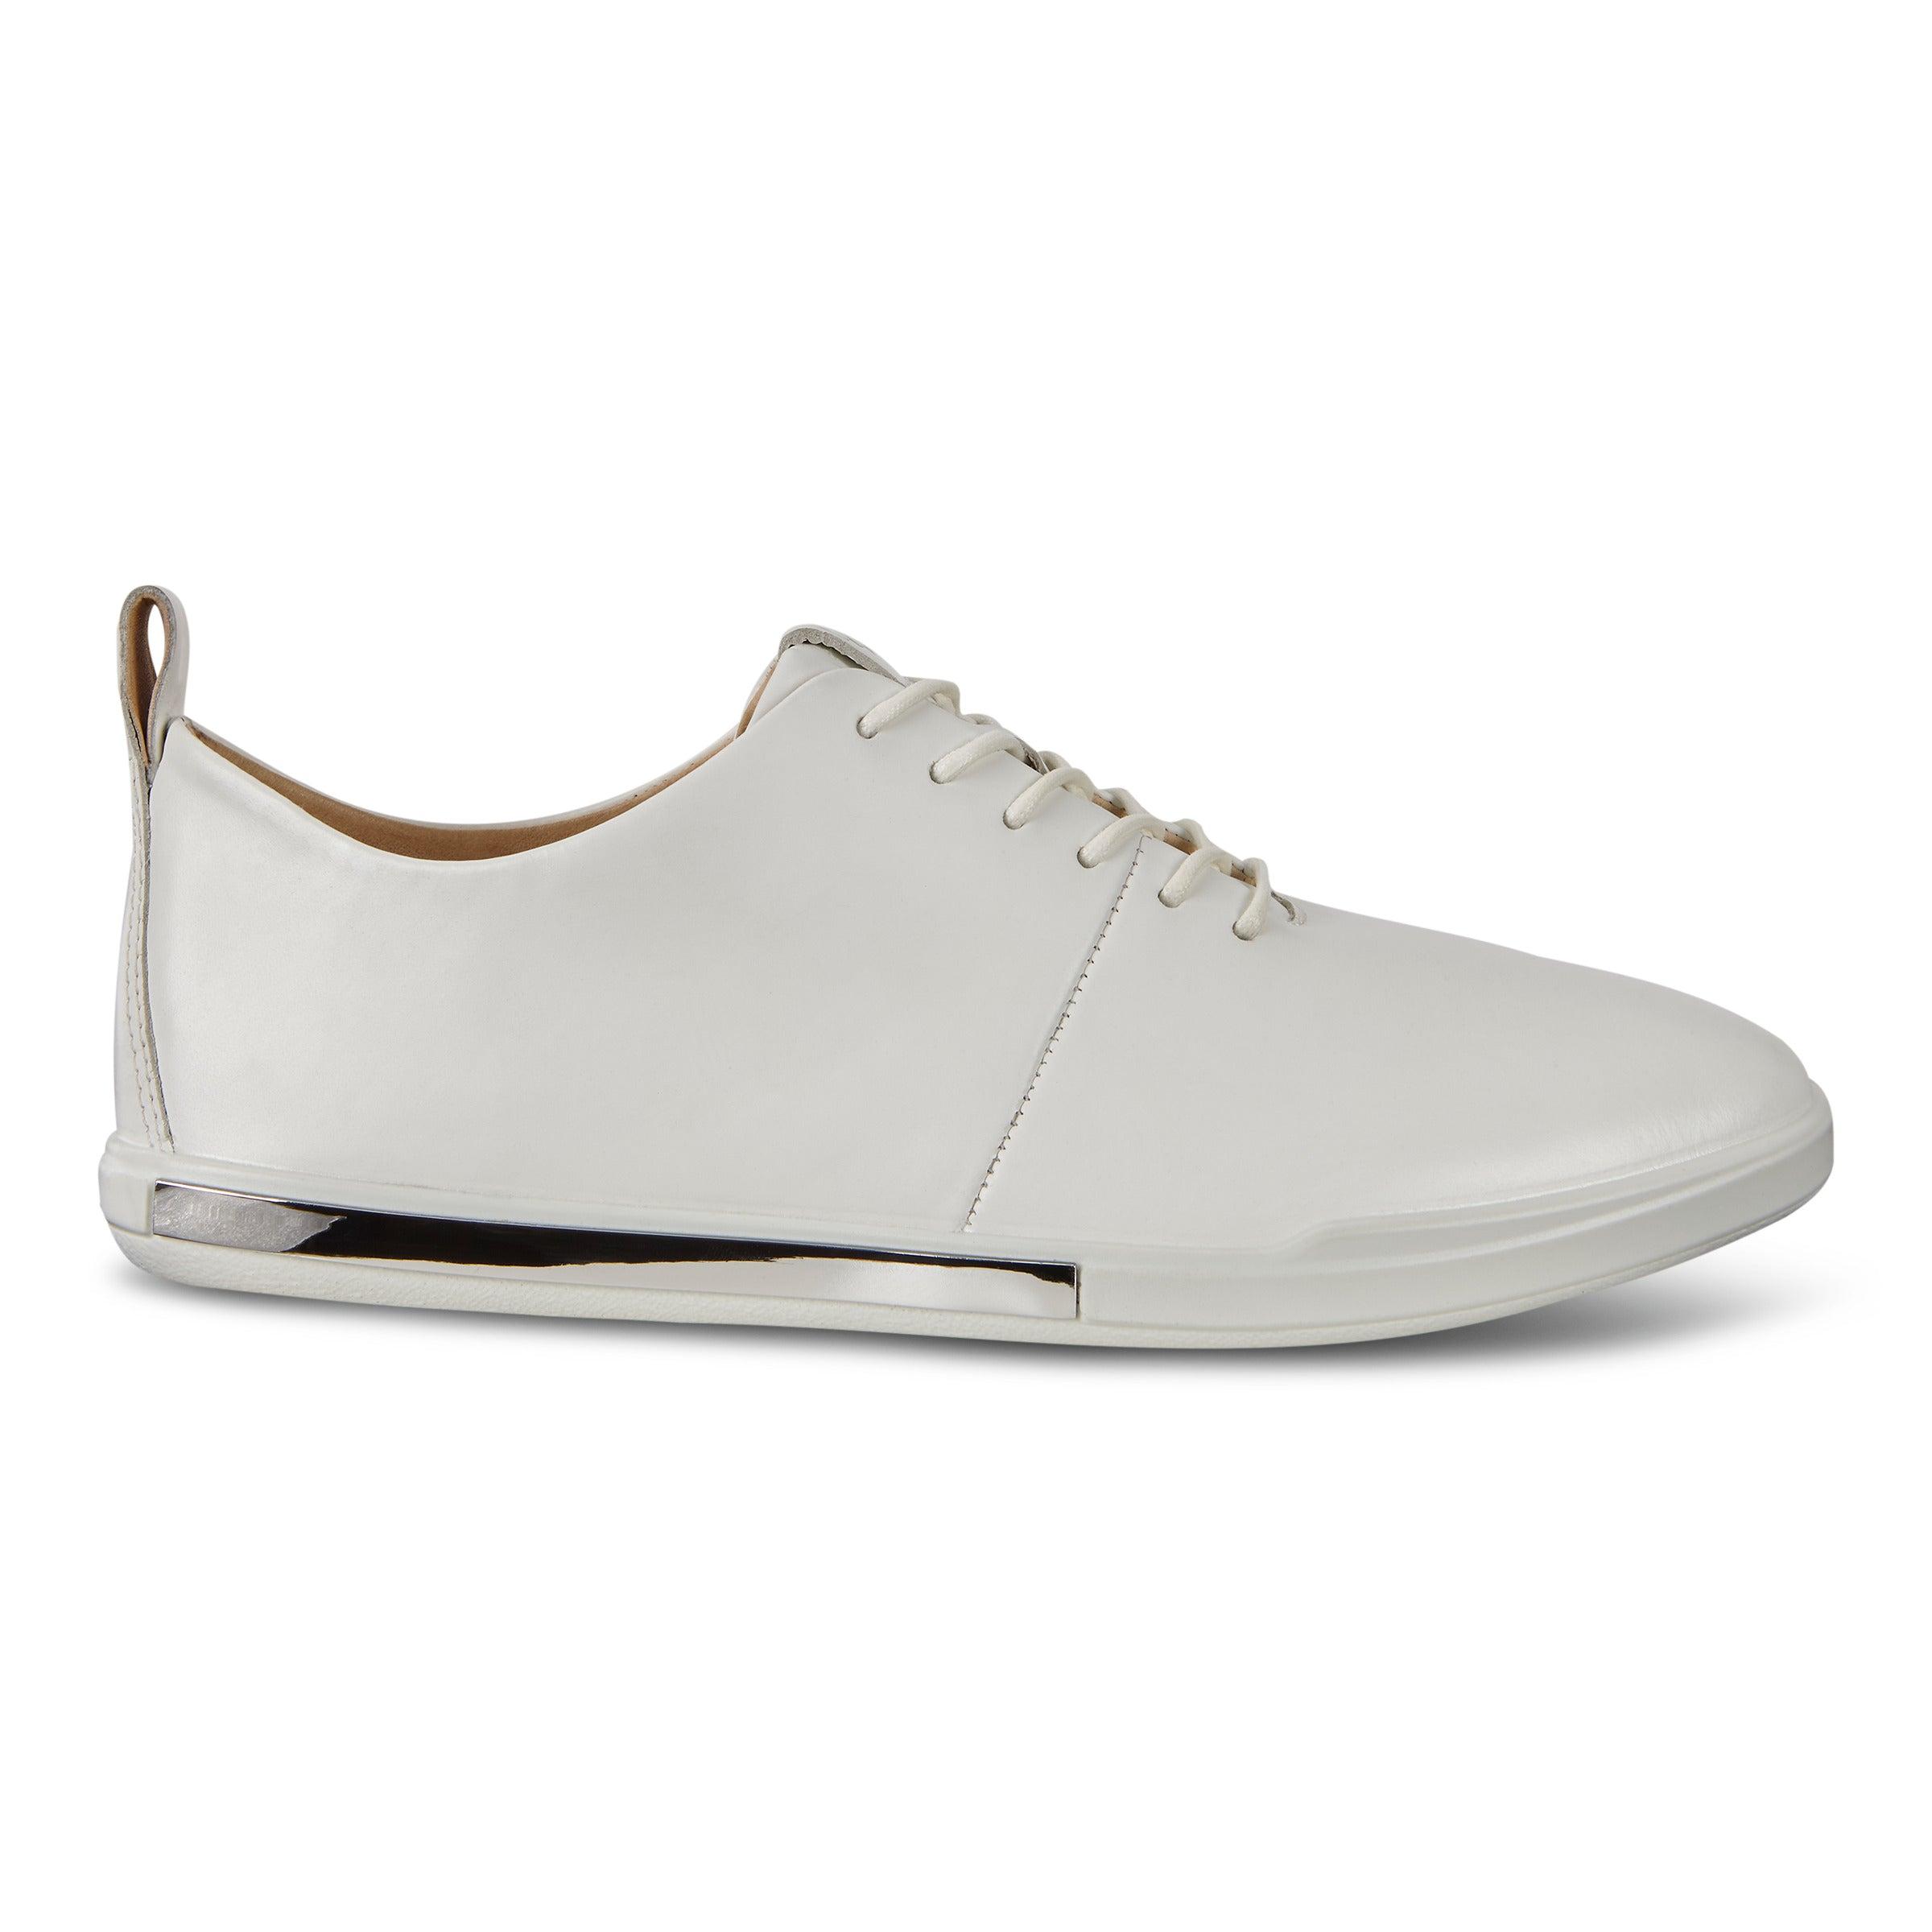 Ecco Simpil Ii Lightweight Shoes in White | Lyst